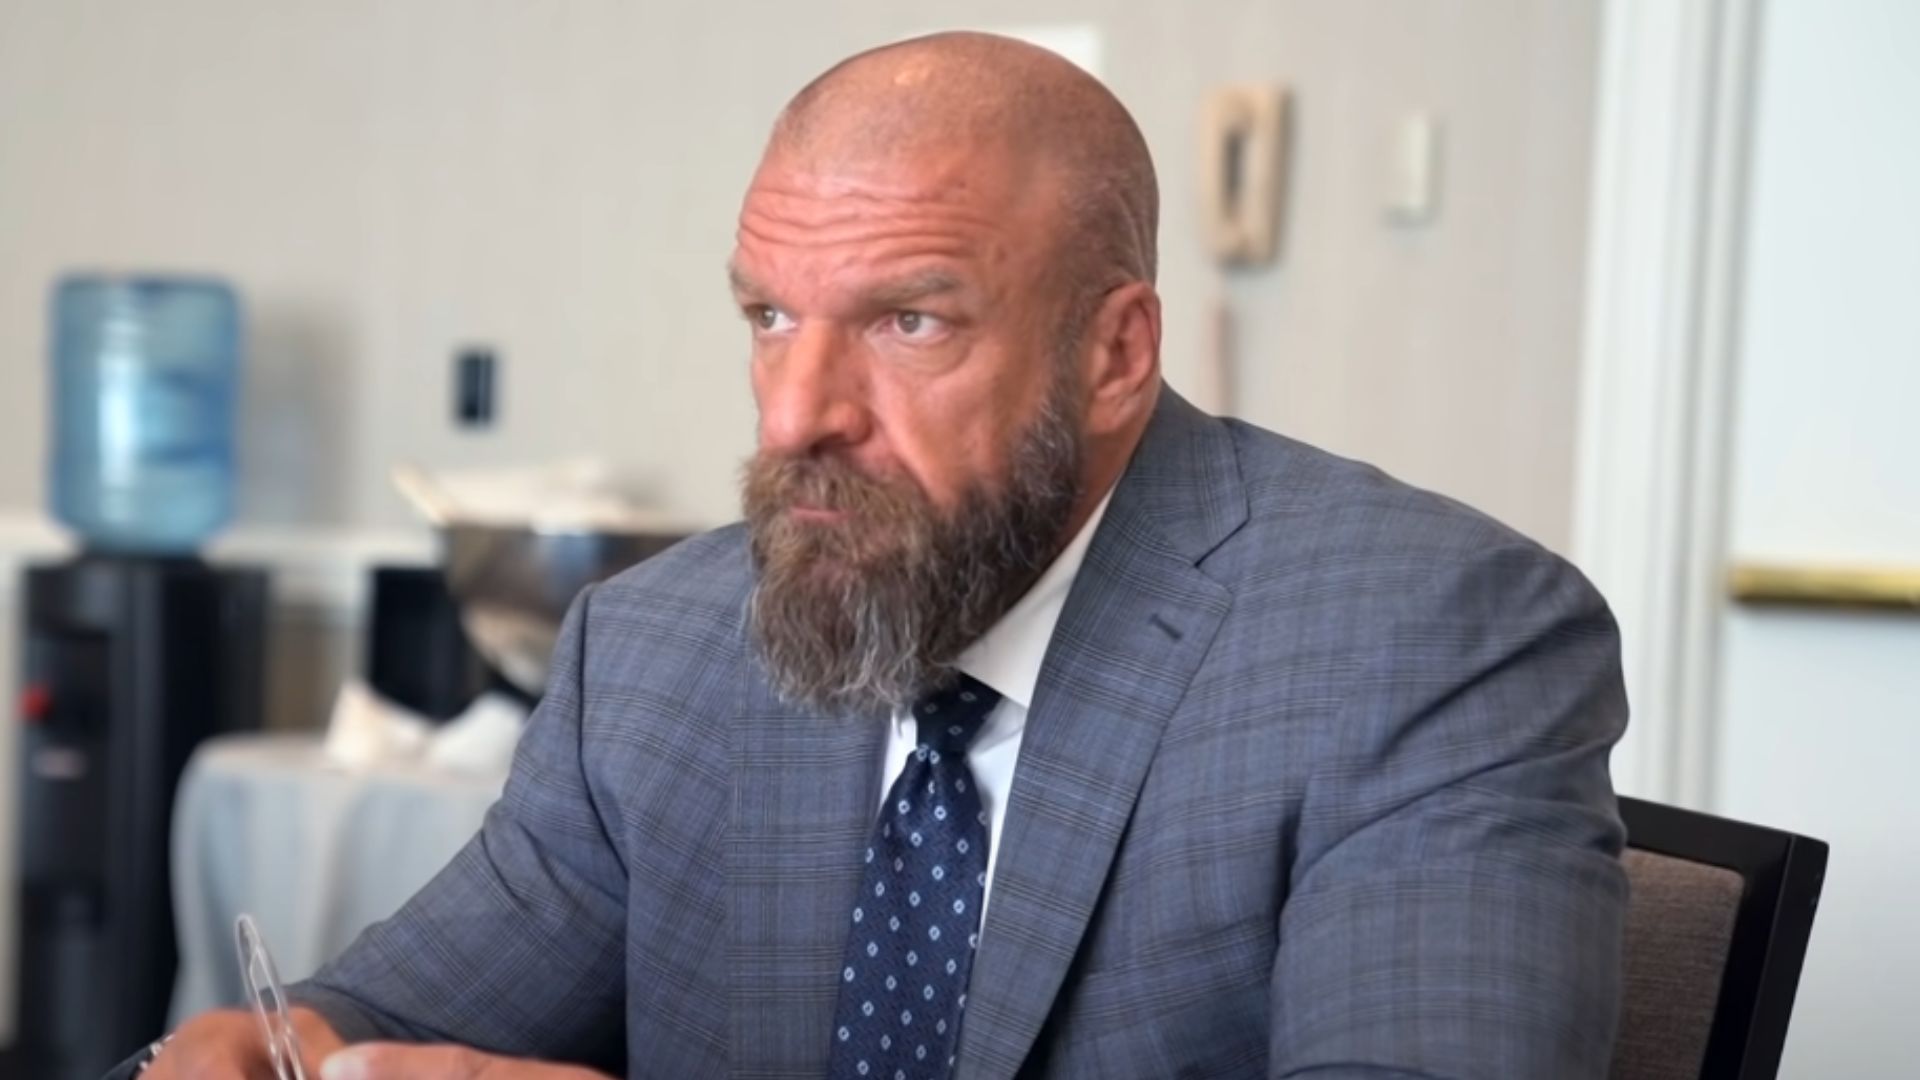 Triple H has brought back several stars in the last few weeks